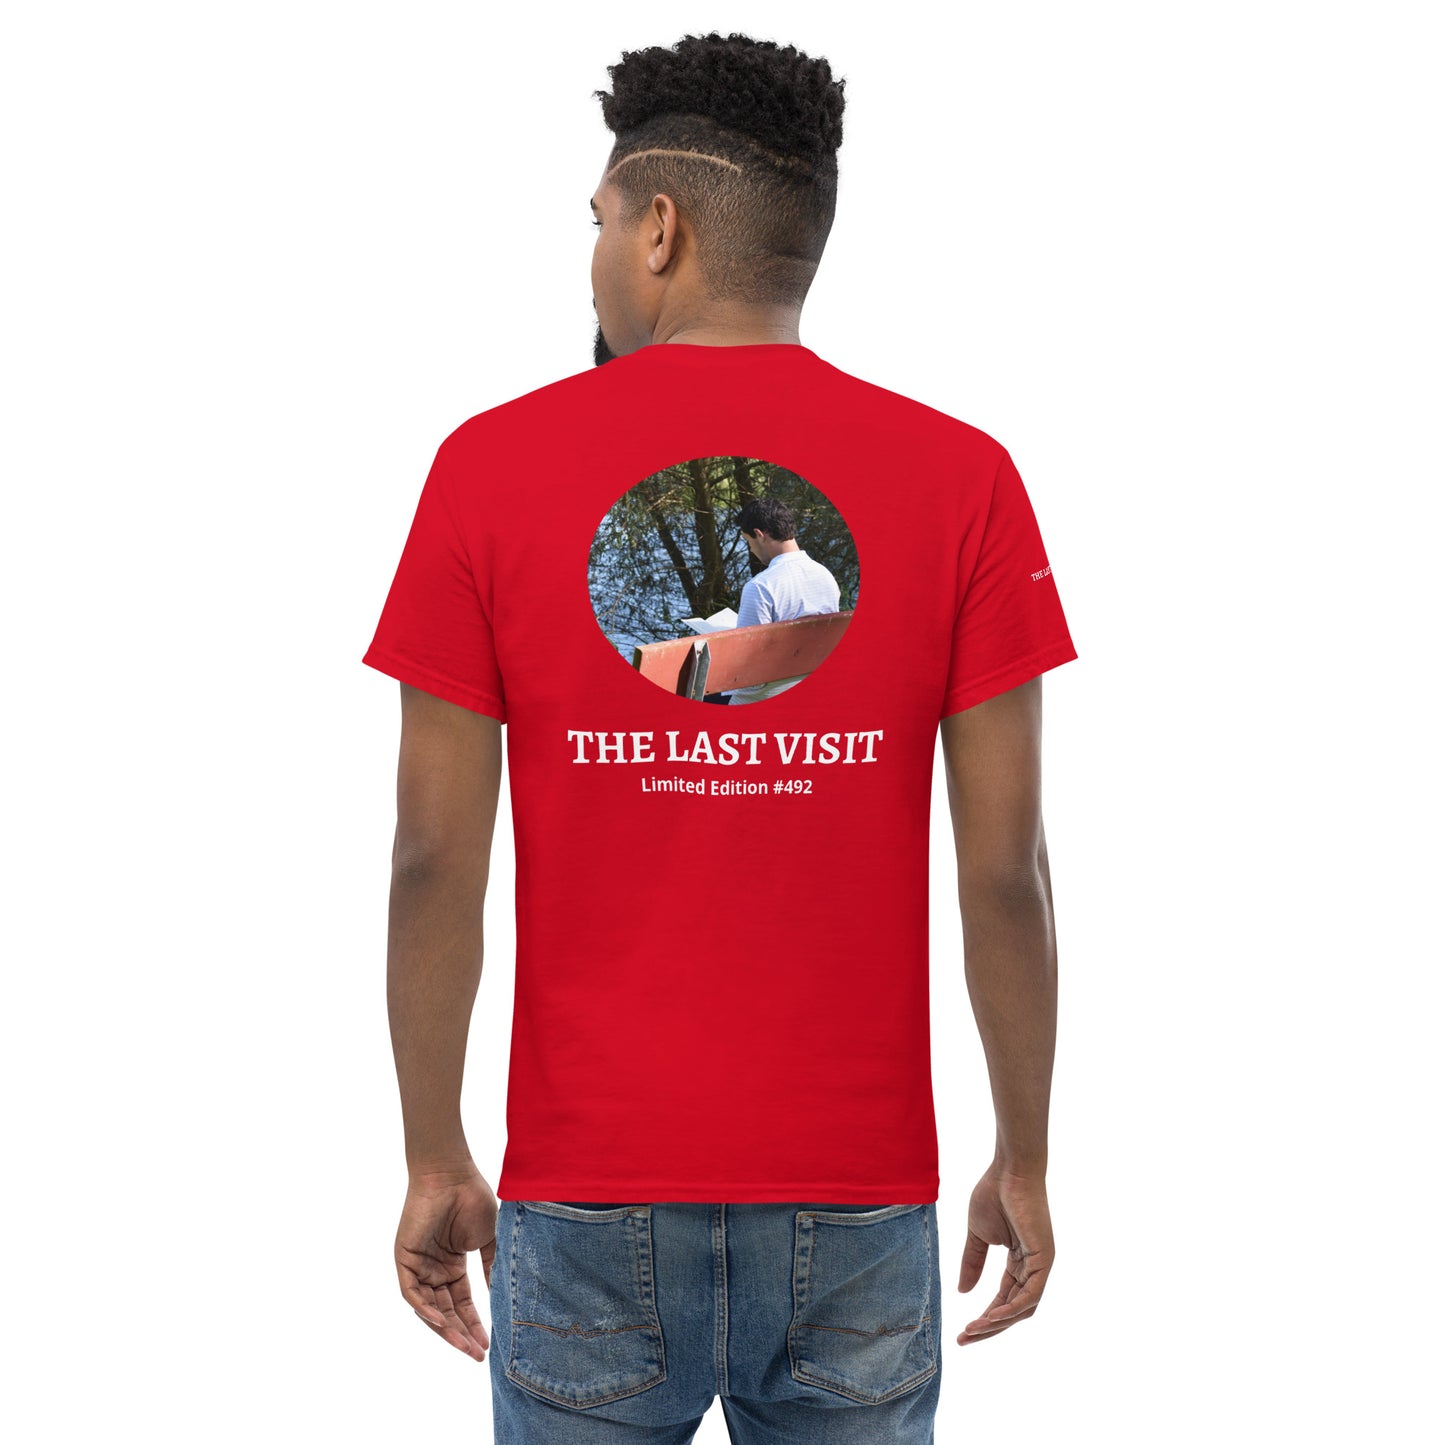 The Last Visit - Limited Edition